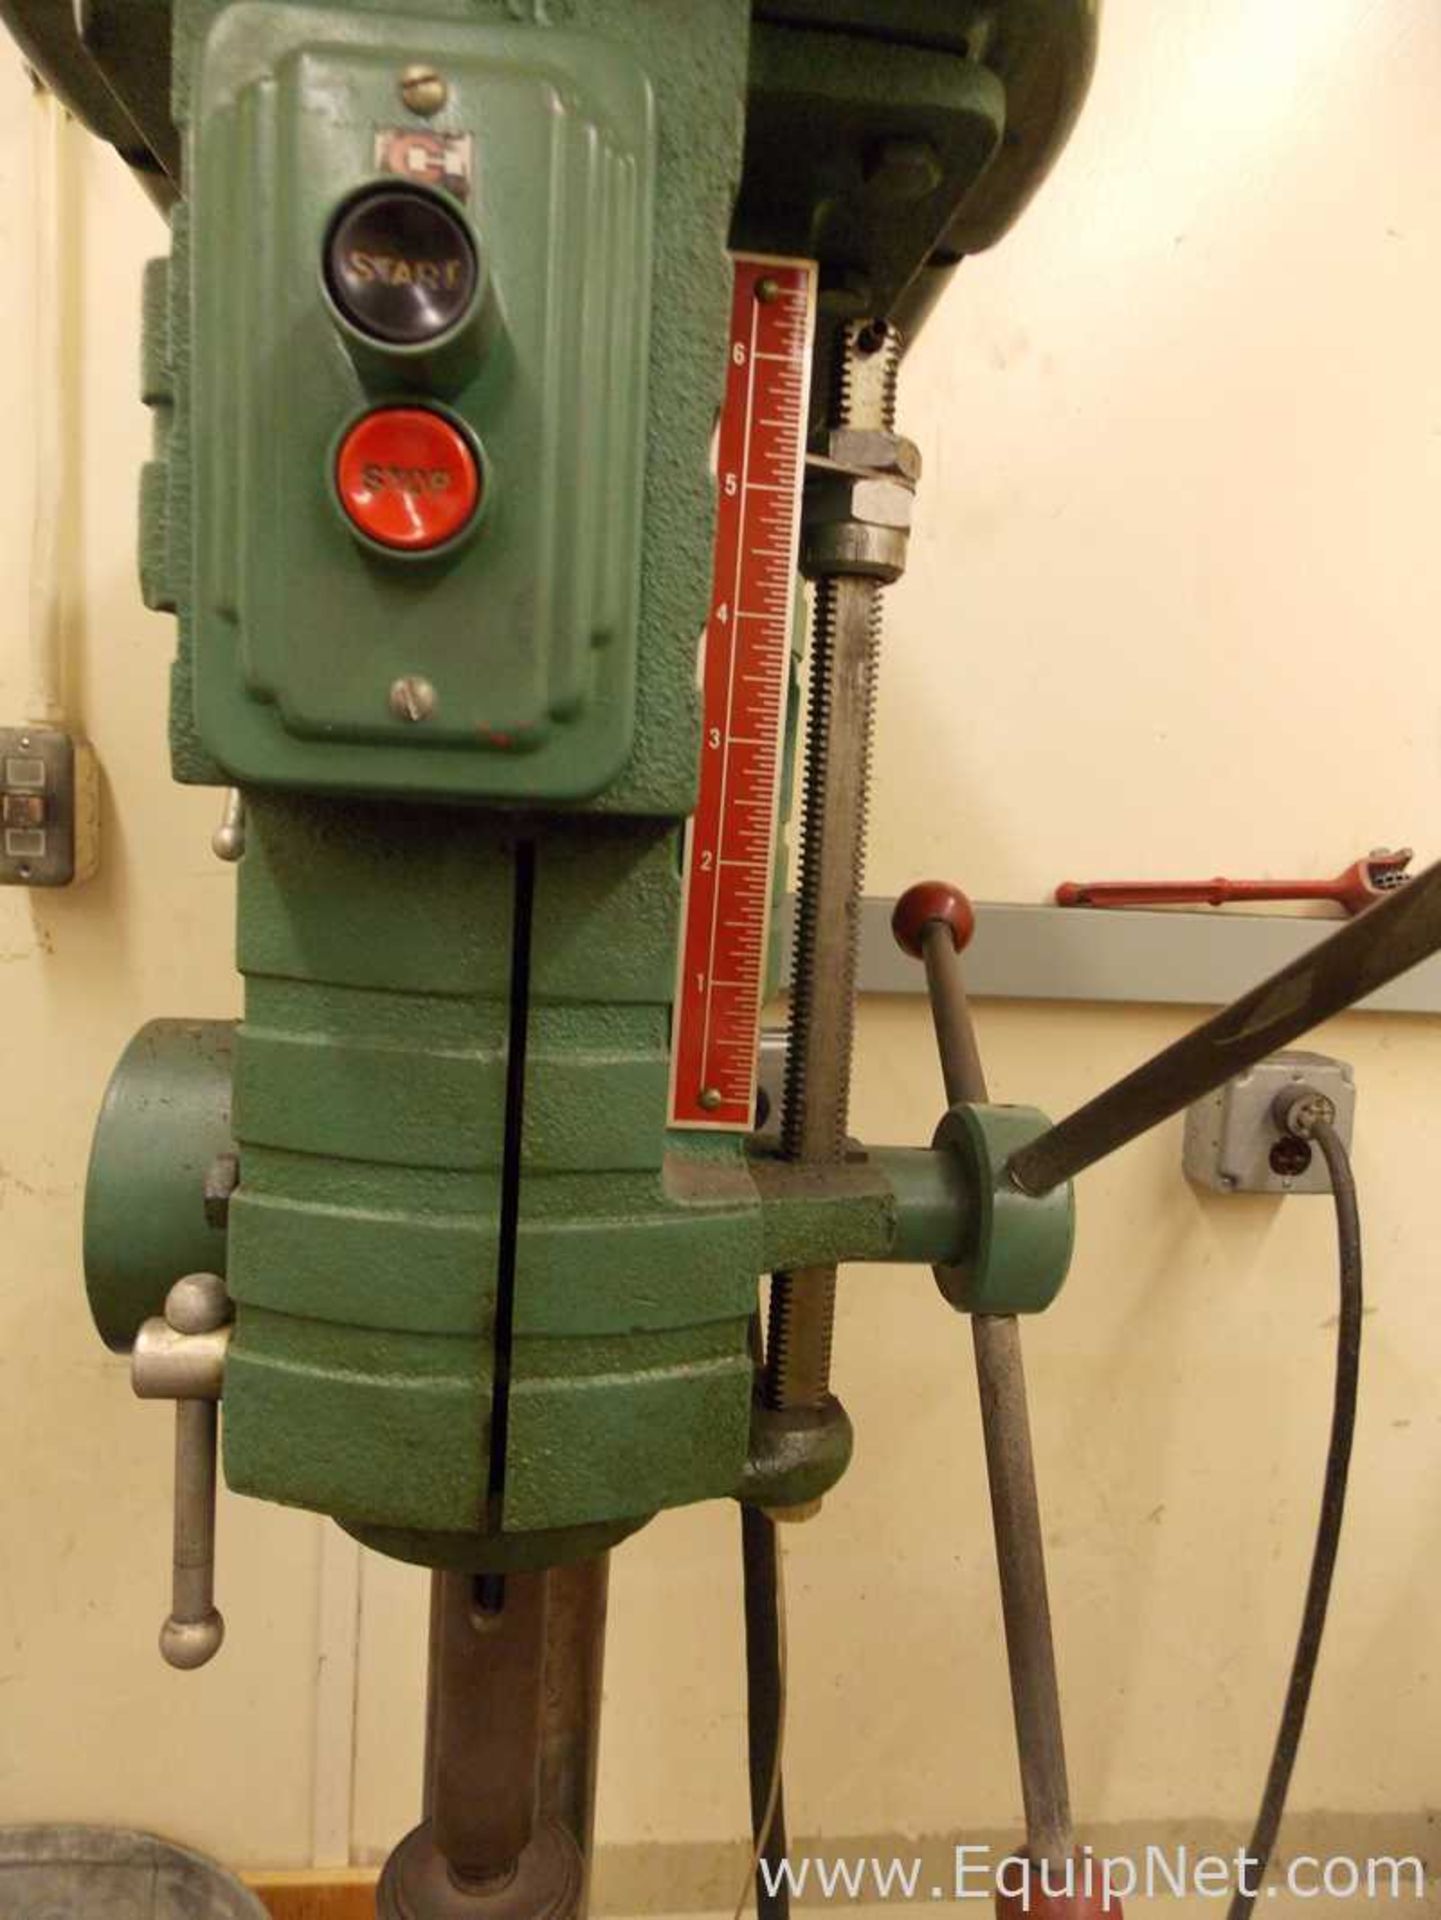 EQUIPNET LISTING #775367; REMOVAL COST: TBD; MODEL: 1150; DESCRIPTION: Powermatic 1150 Drill - Image 4 of 6